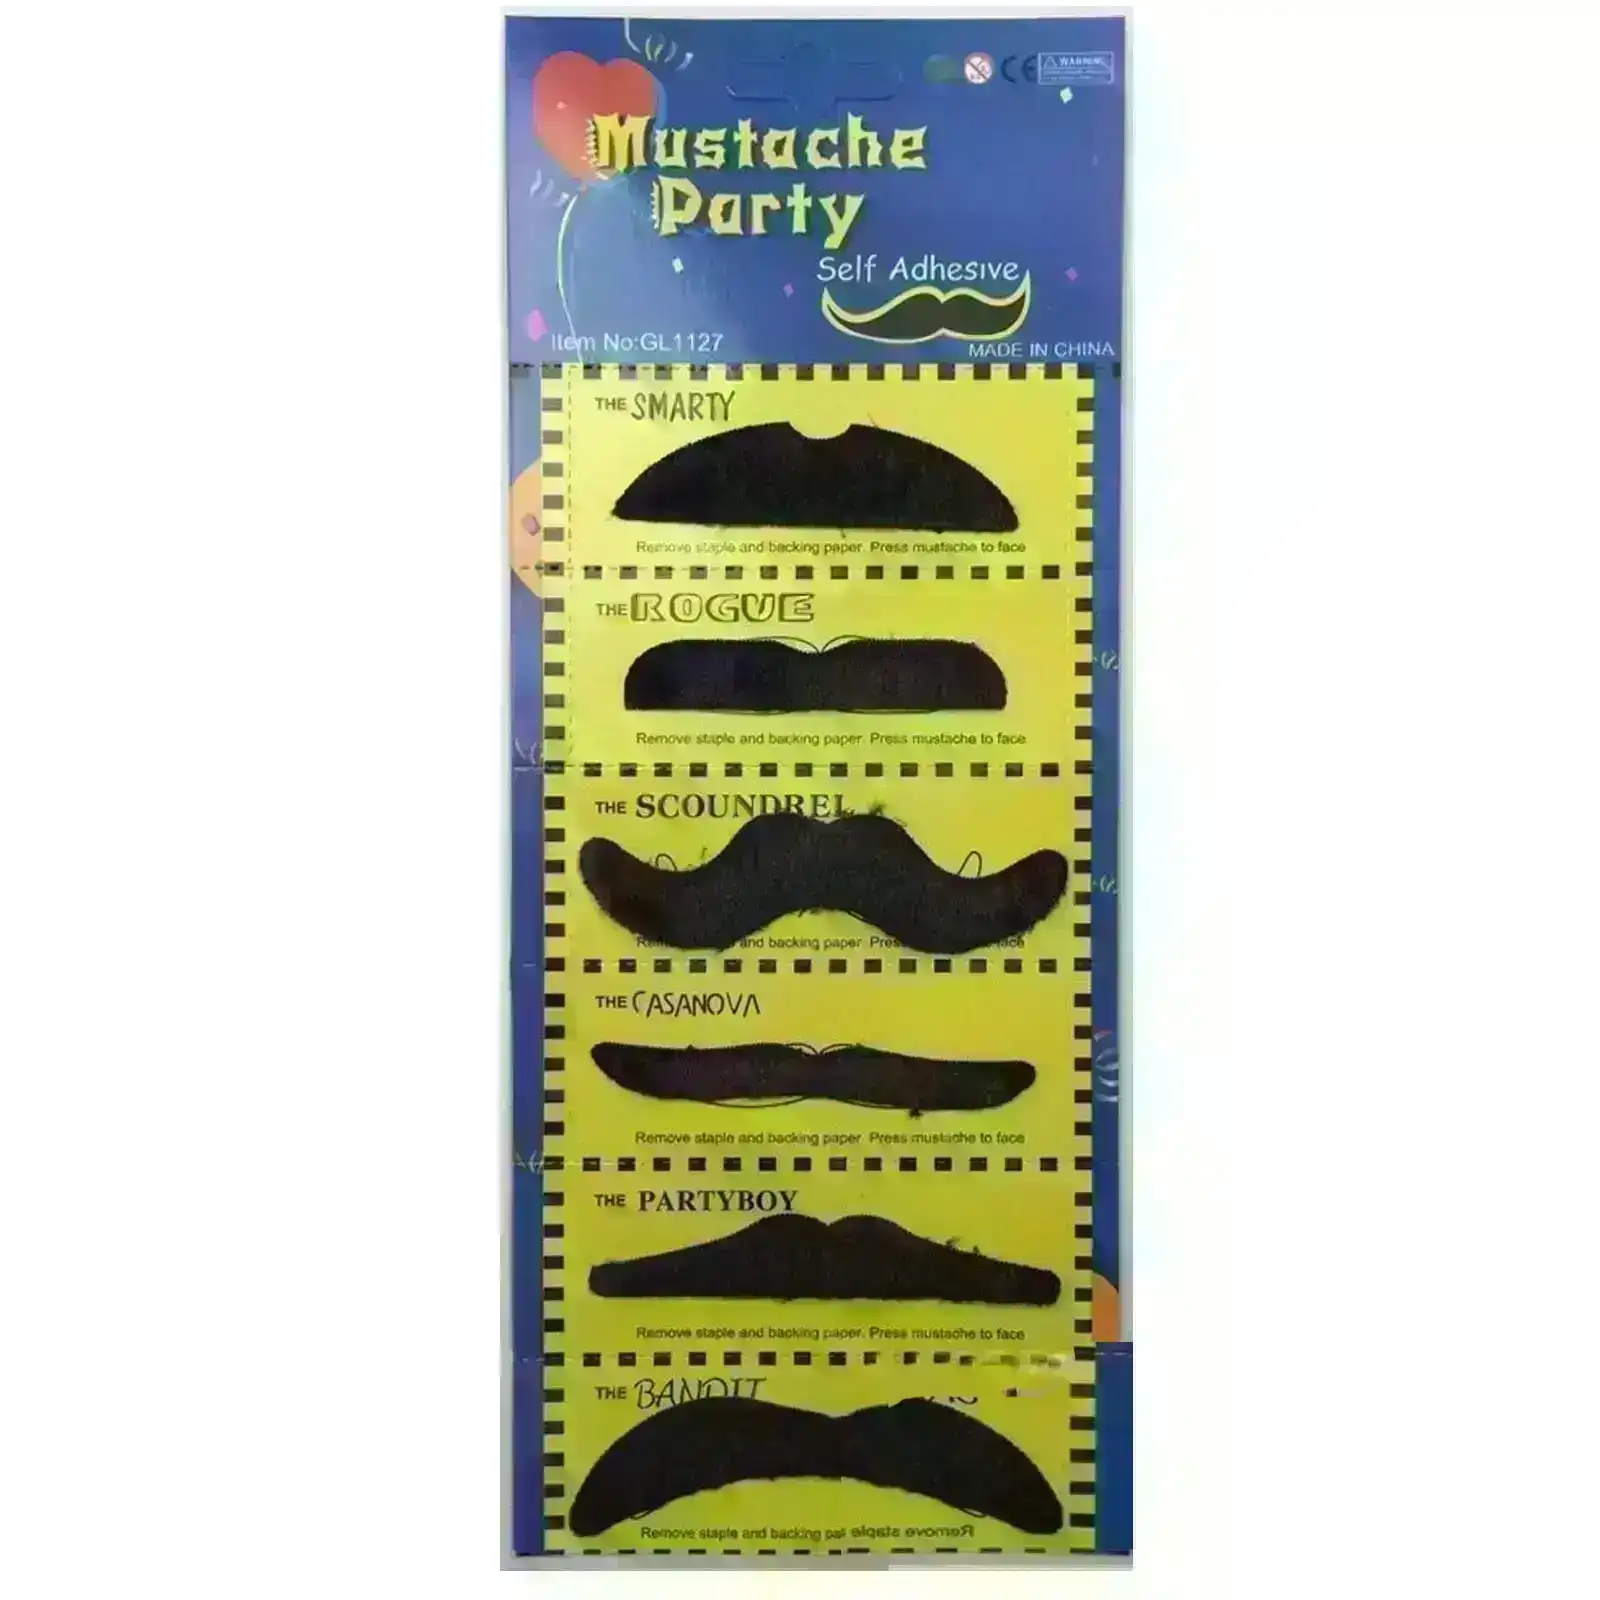 PARTY MOUSTACHE 70s Fake Mustache Costume Fancy Dress Props Halloween Adhesive